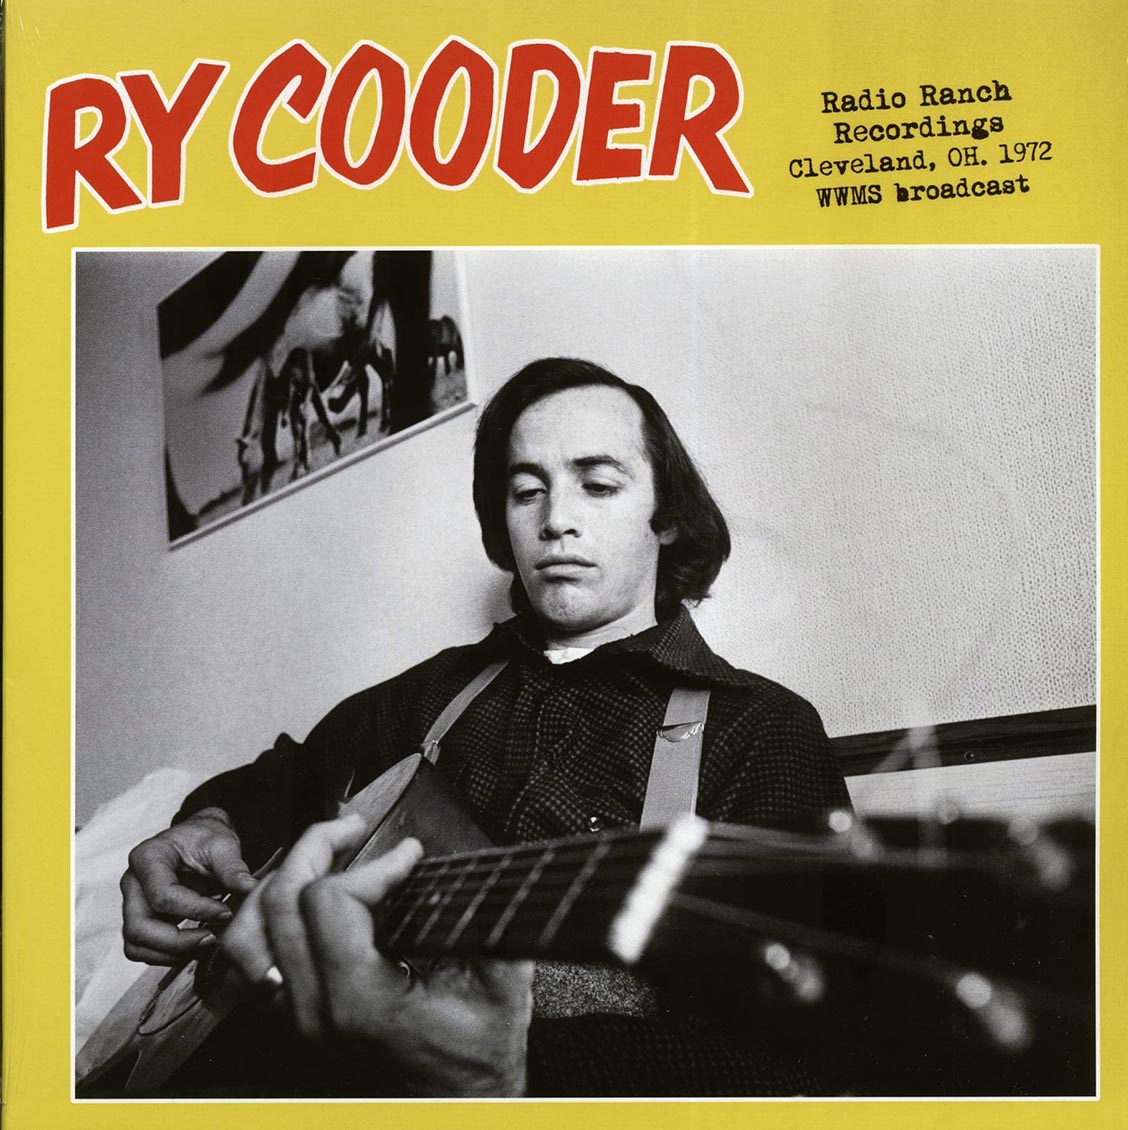 Ry Cooder - Radio Ranch Recordings: Cleveland, OH 1972 WWMS Broadcast (ltd. 500 copies made) - Vinyl LP